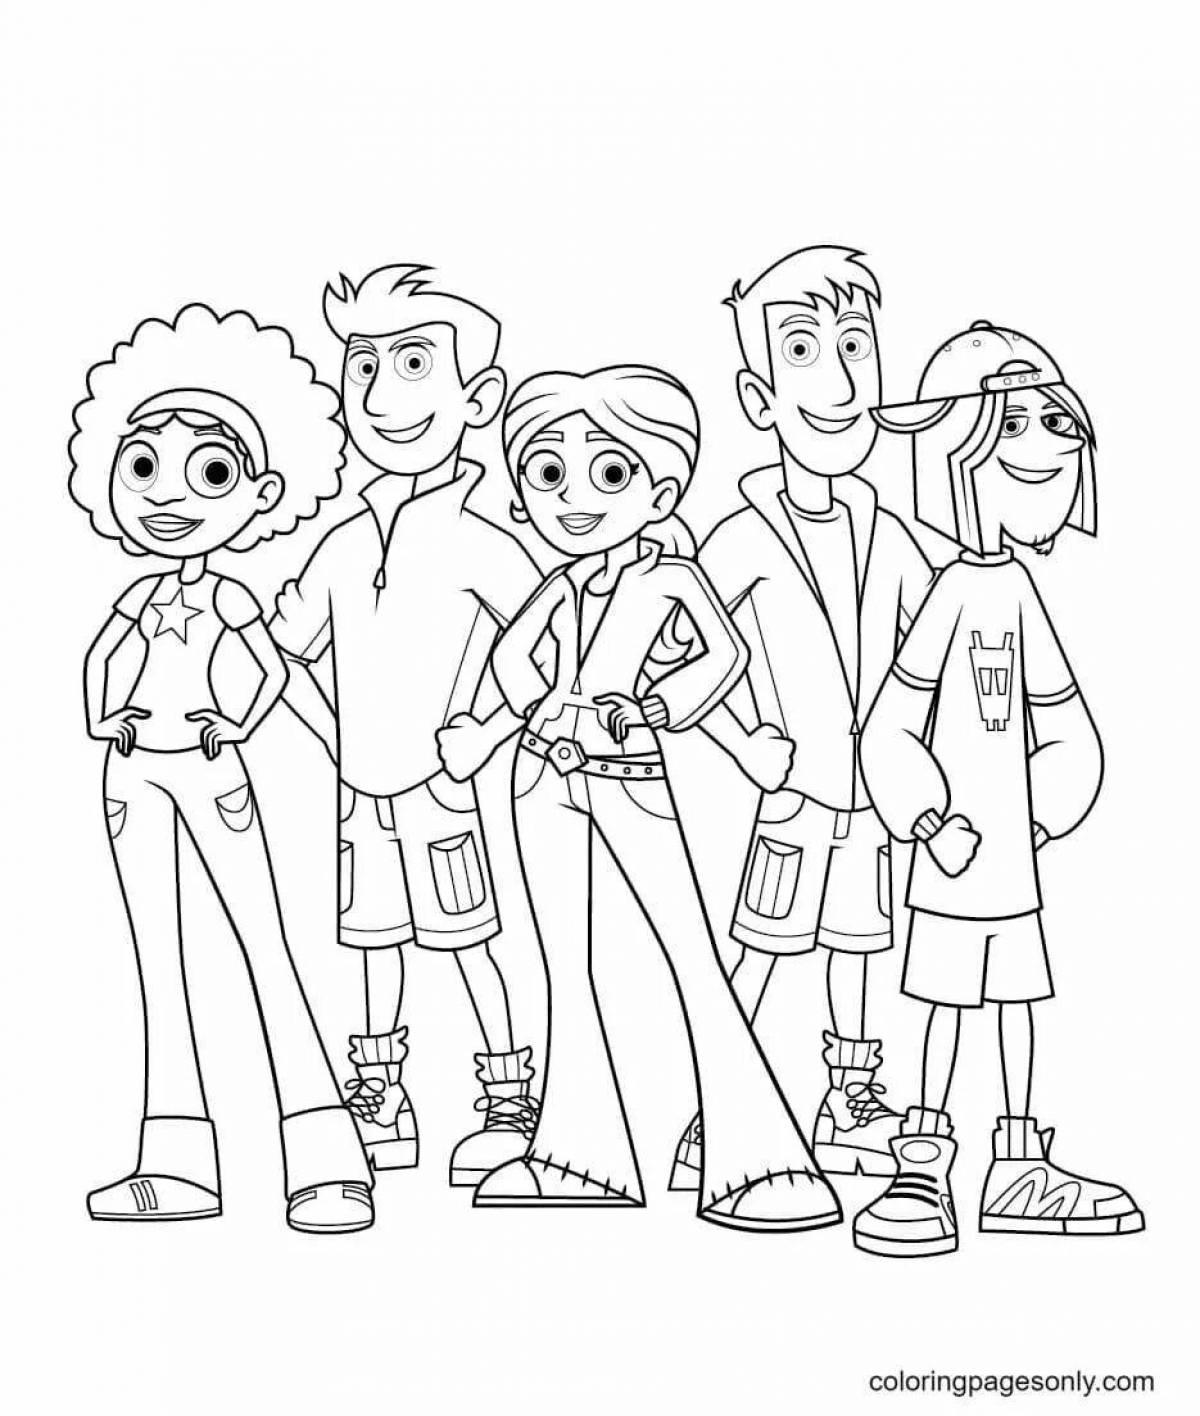 The kratt brothers' playful coloring page design